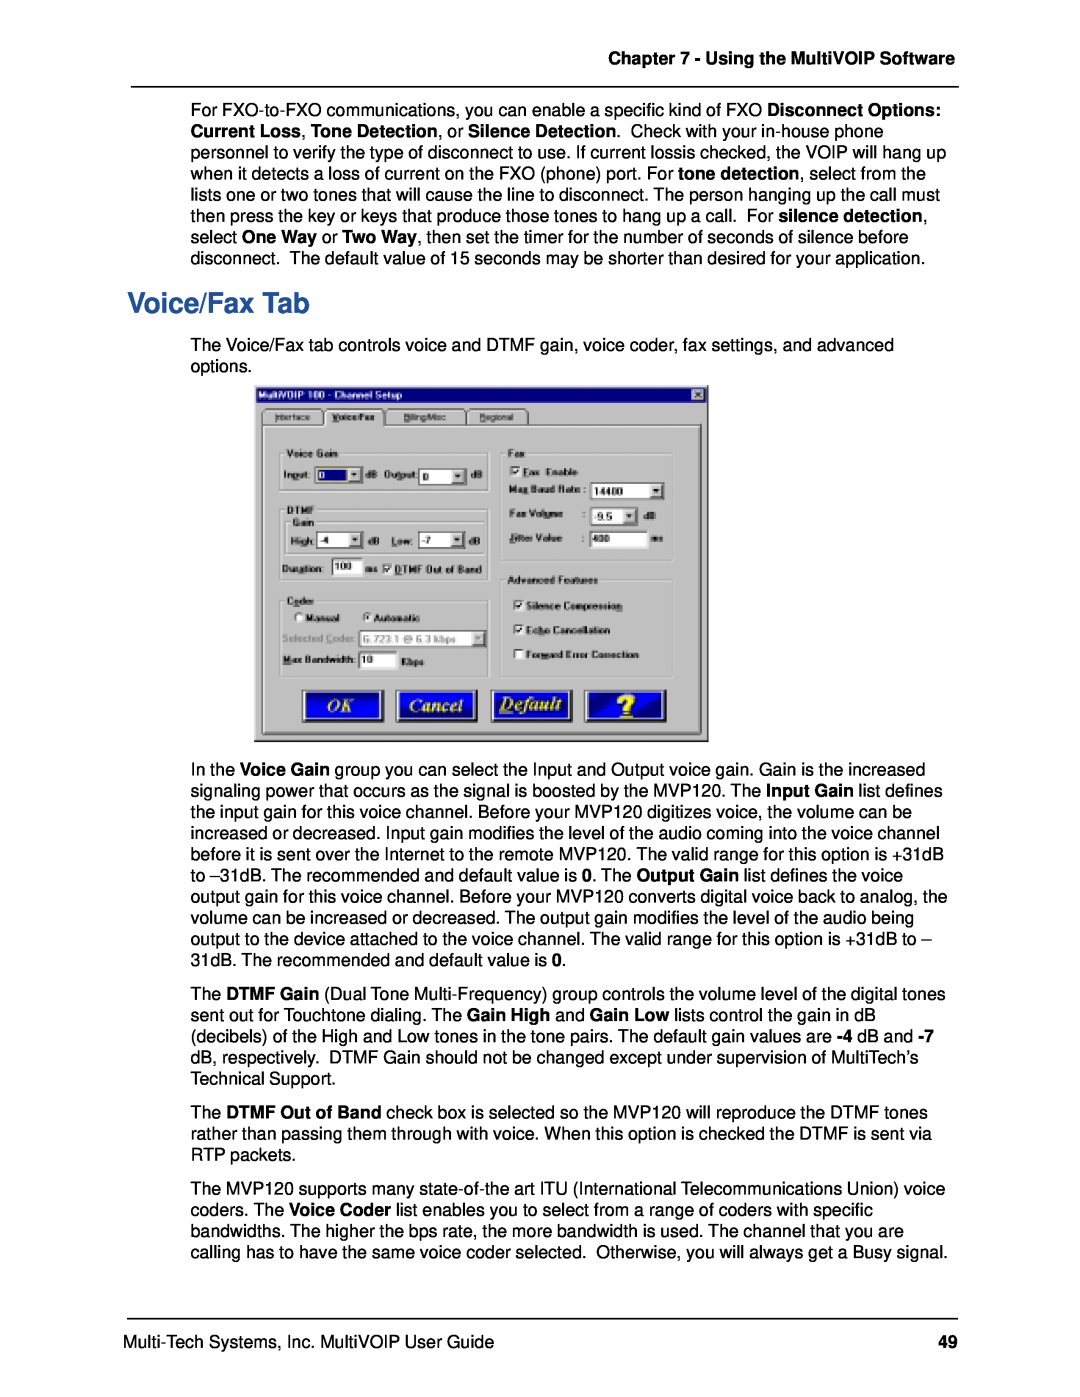 Multi-Tech Systems MVP120 manual Voice/Fax Tab, Using the MultiVOIP Software 